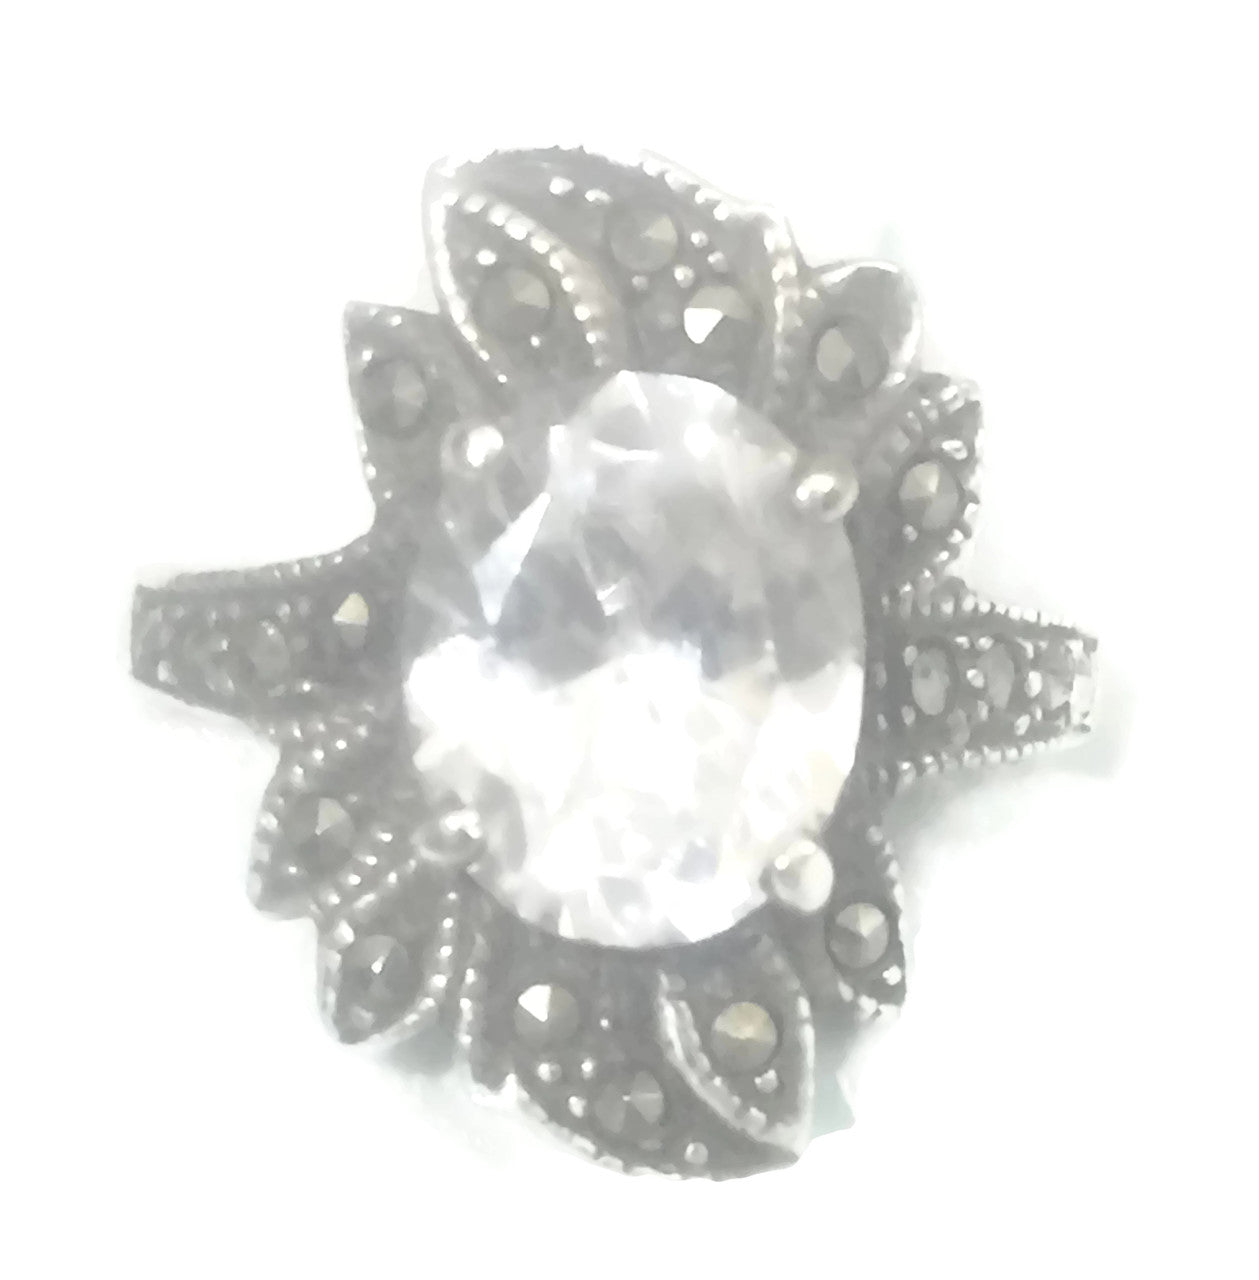 Crystal Ring Flower  Art Deco Marcasite Sterling Silver Size 6.75